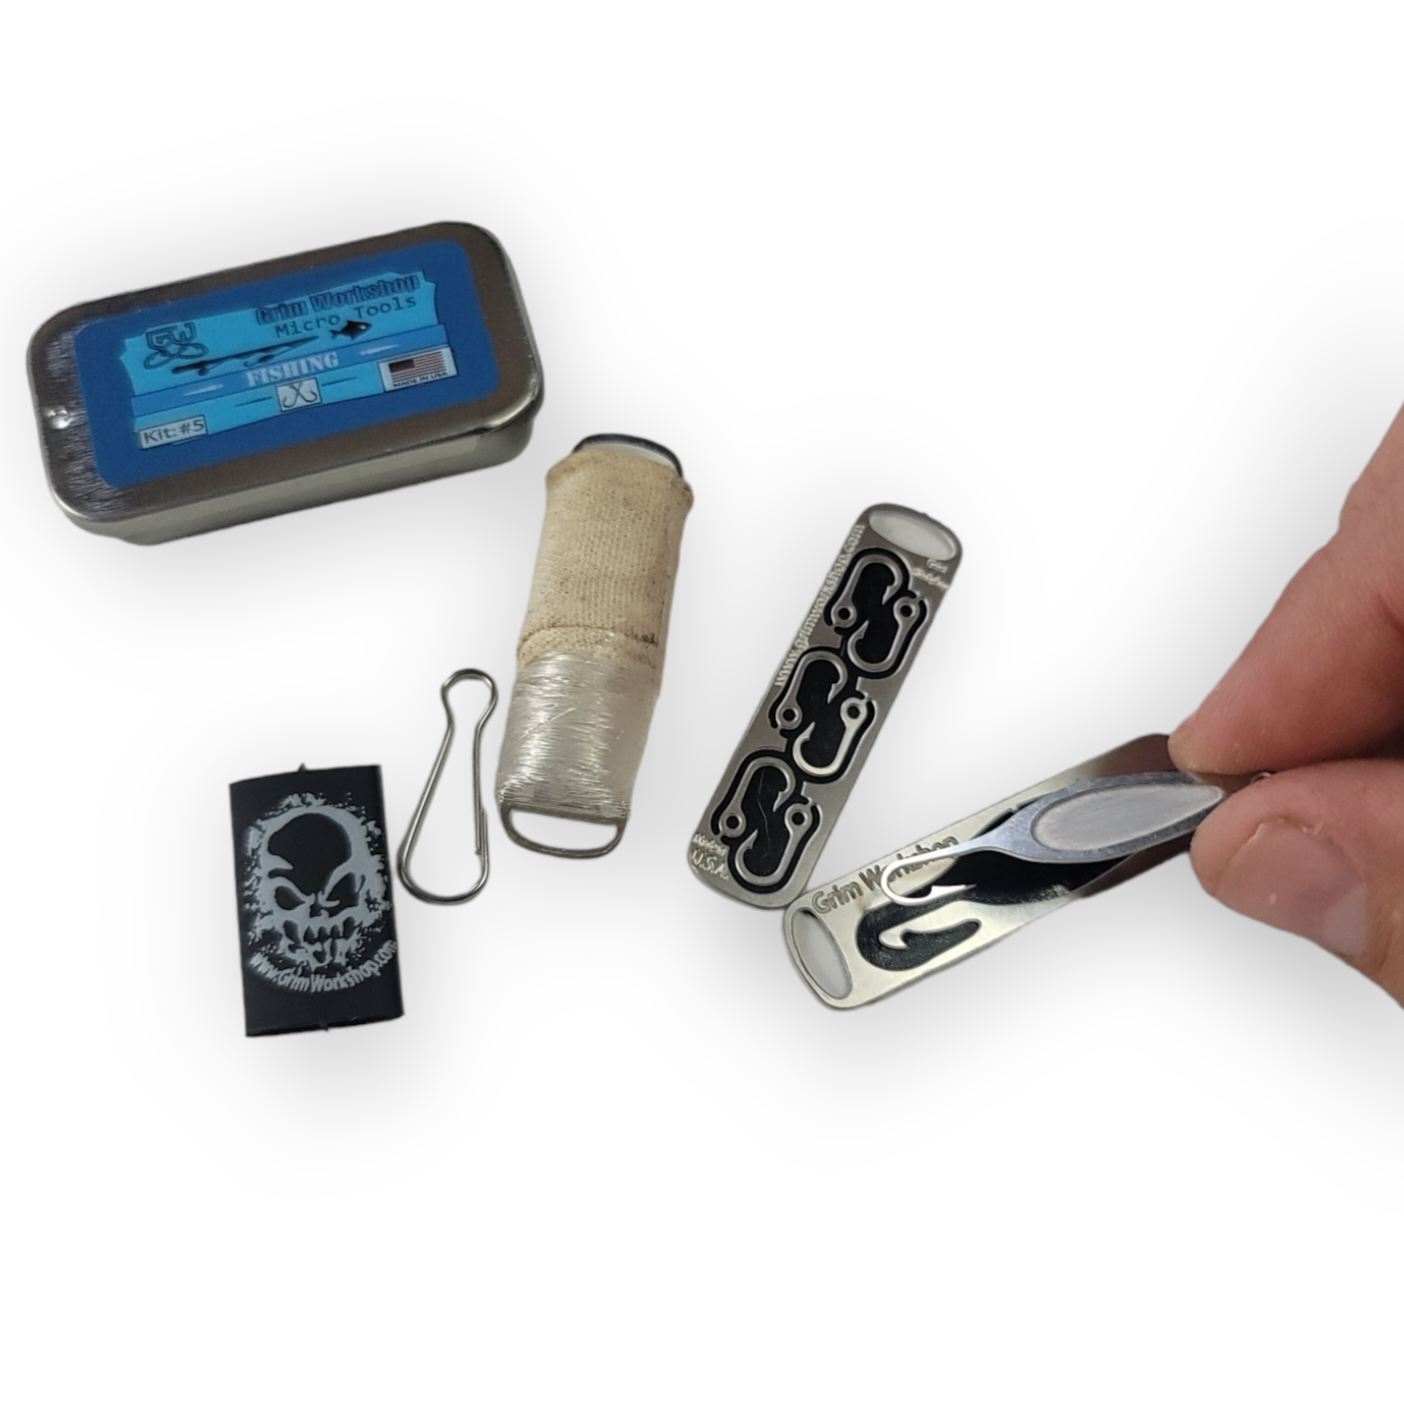 micro fishing kit emergency fishing kit the size of a paperclip!